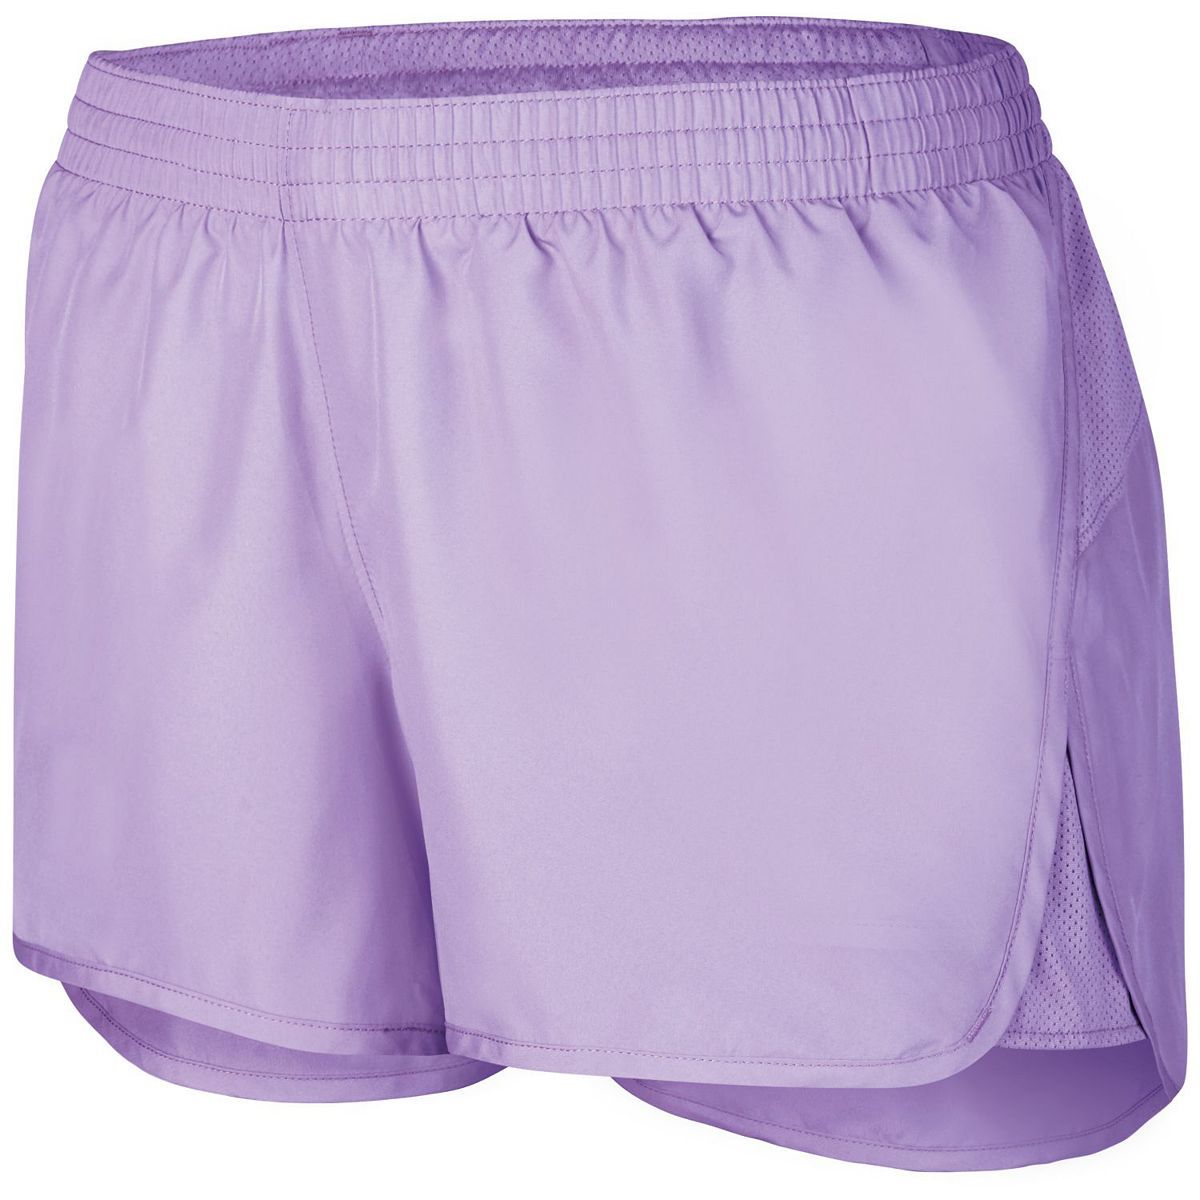 Augusta Sportswear Girls Wayfarer Shorts in Light Lavender  -Part of the Girls, Augusta-Products, Girls-Shorts product lines at KanaleyCreations.com